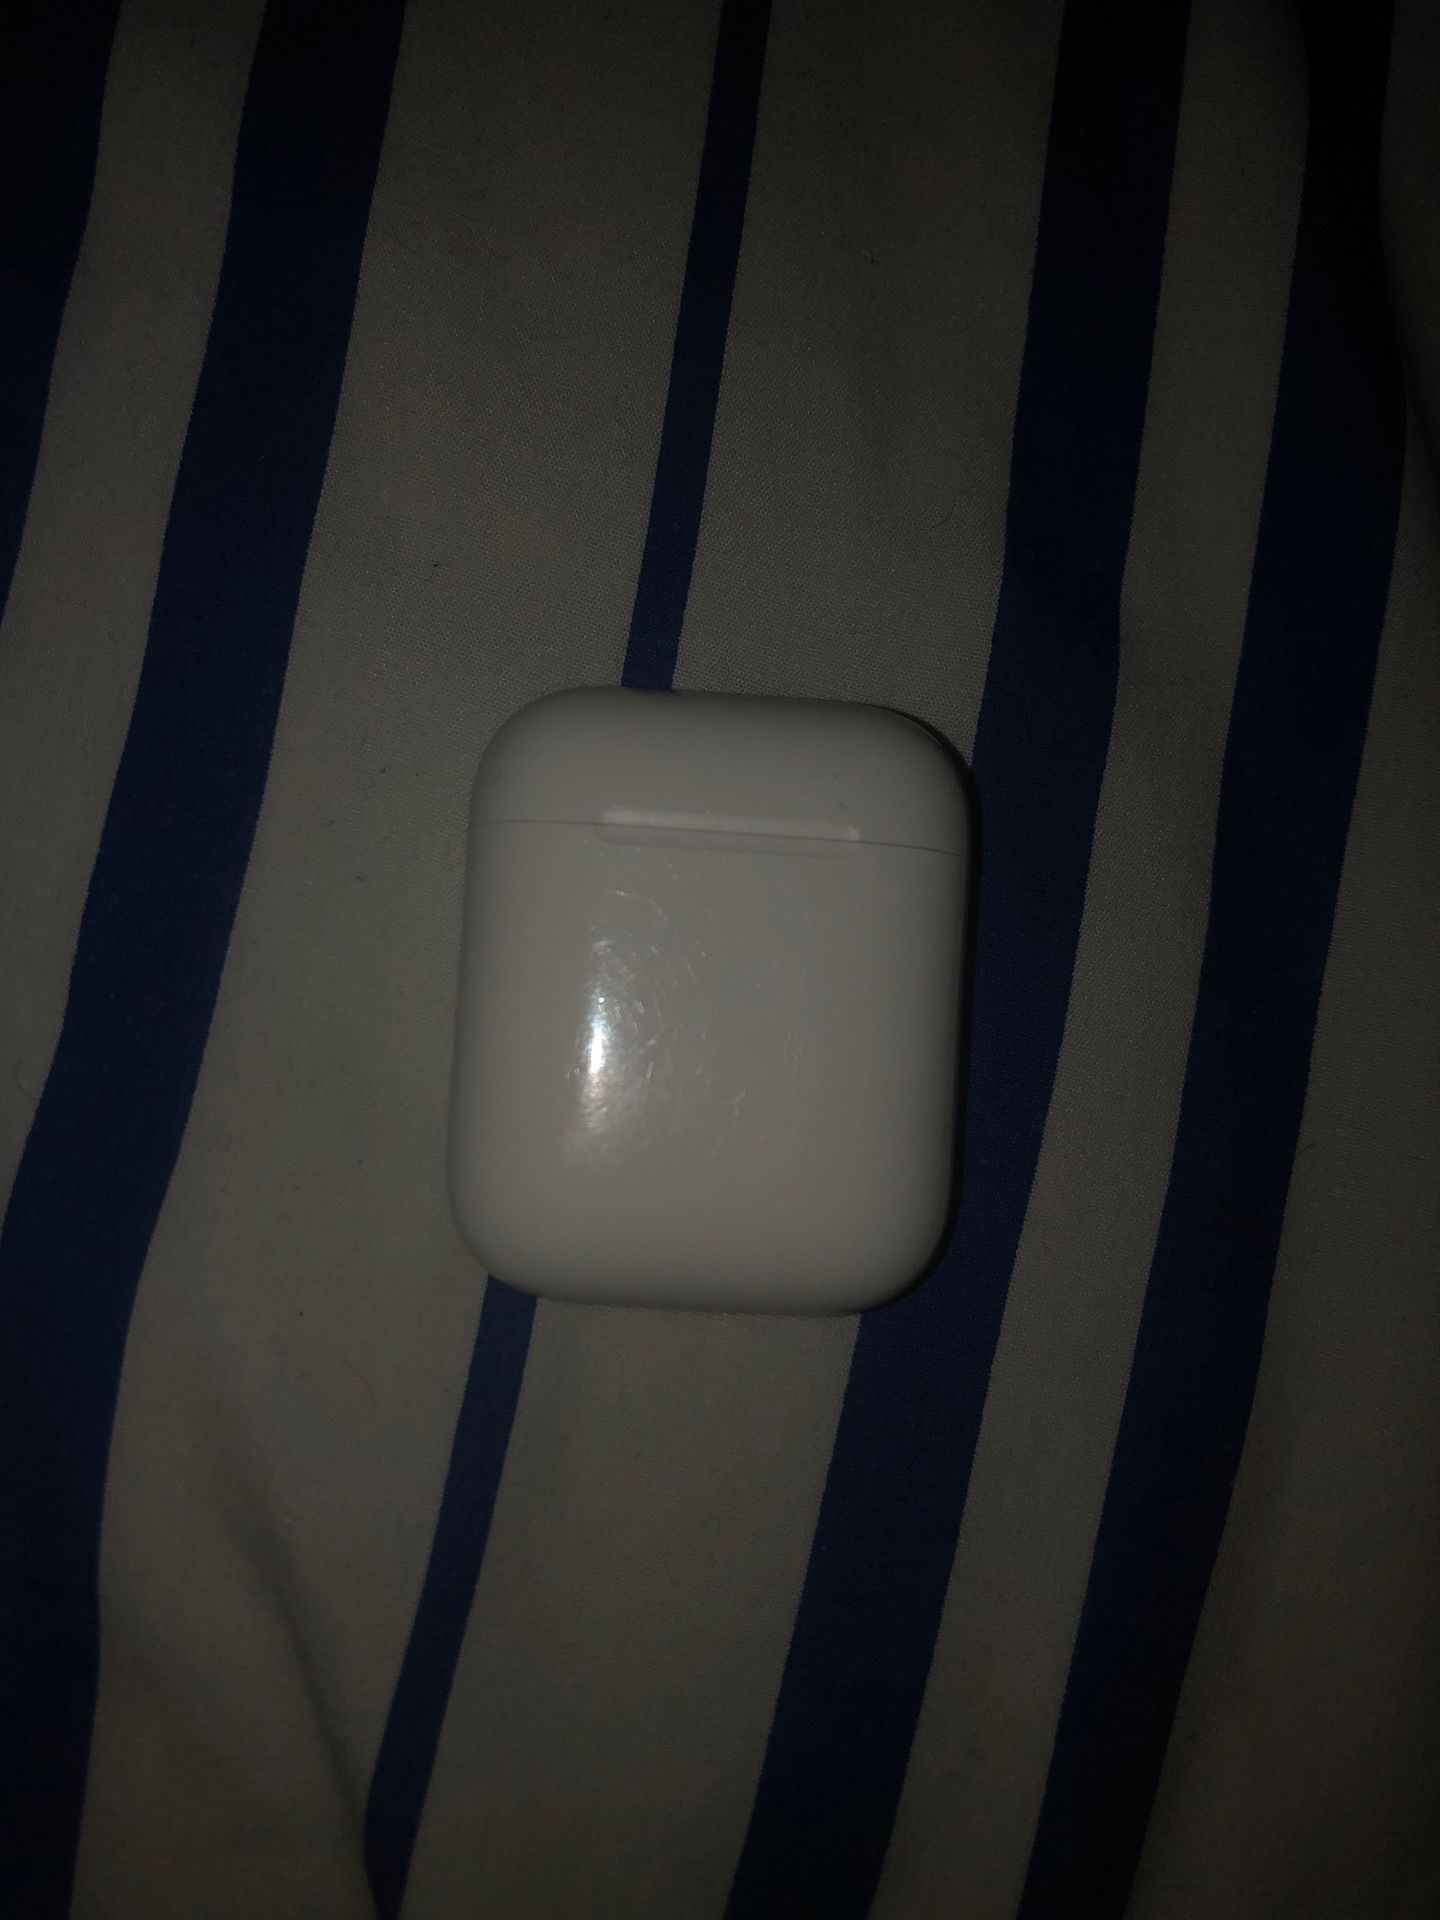 AIRPODS FOR SALE ONE EARBUD